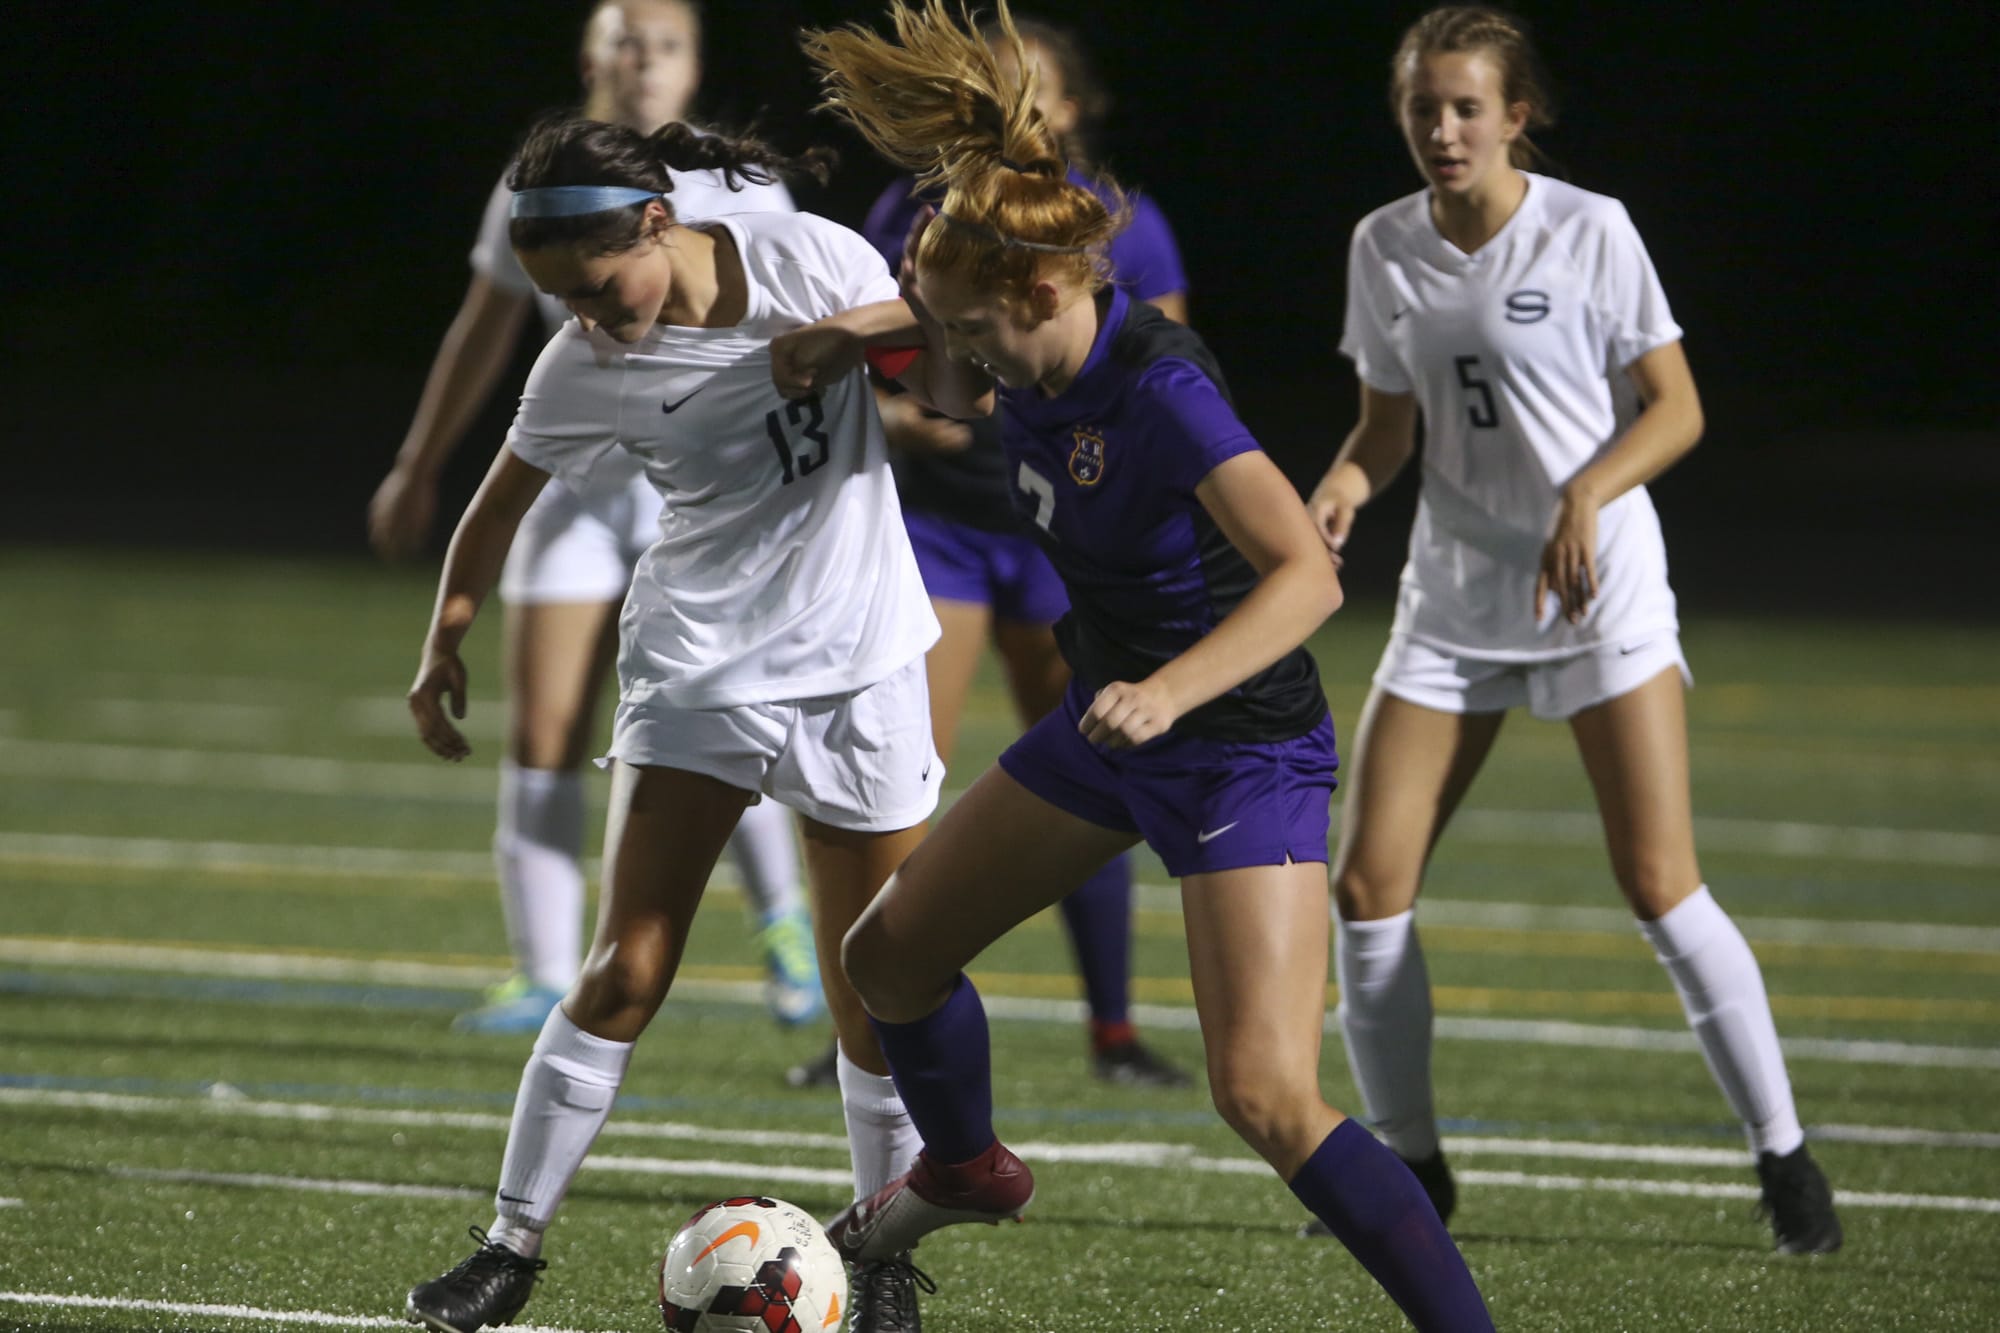 Skyview's Olivia Madden (13) and Columbia River's Reagan Griffith (7) fight for the ball. Skyview beat Columbia River, 1-0, in the the season opener on Sept. 4, 2018 at Columbia River High School in Vancouver. (Randy L.